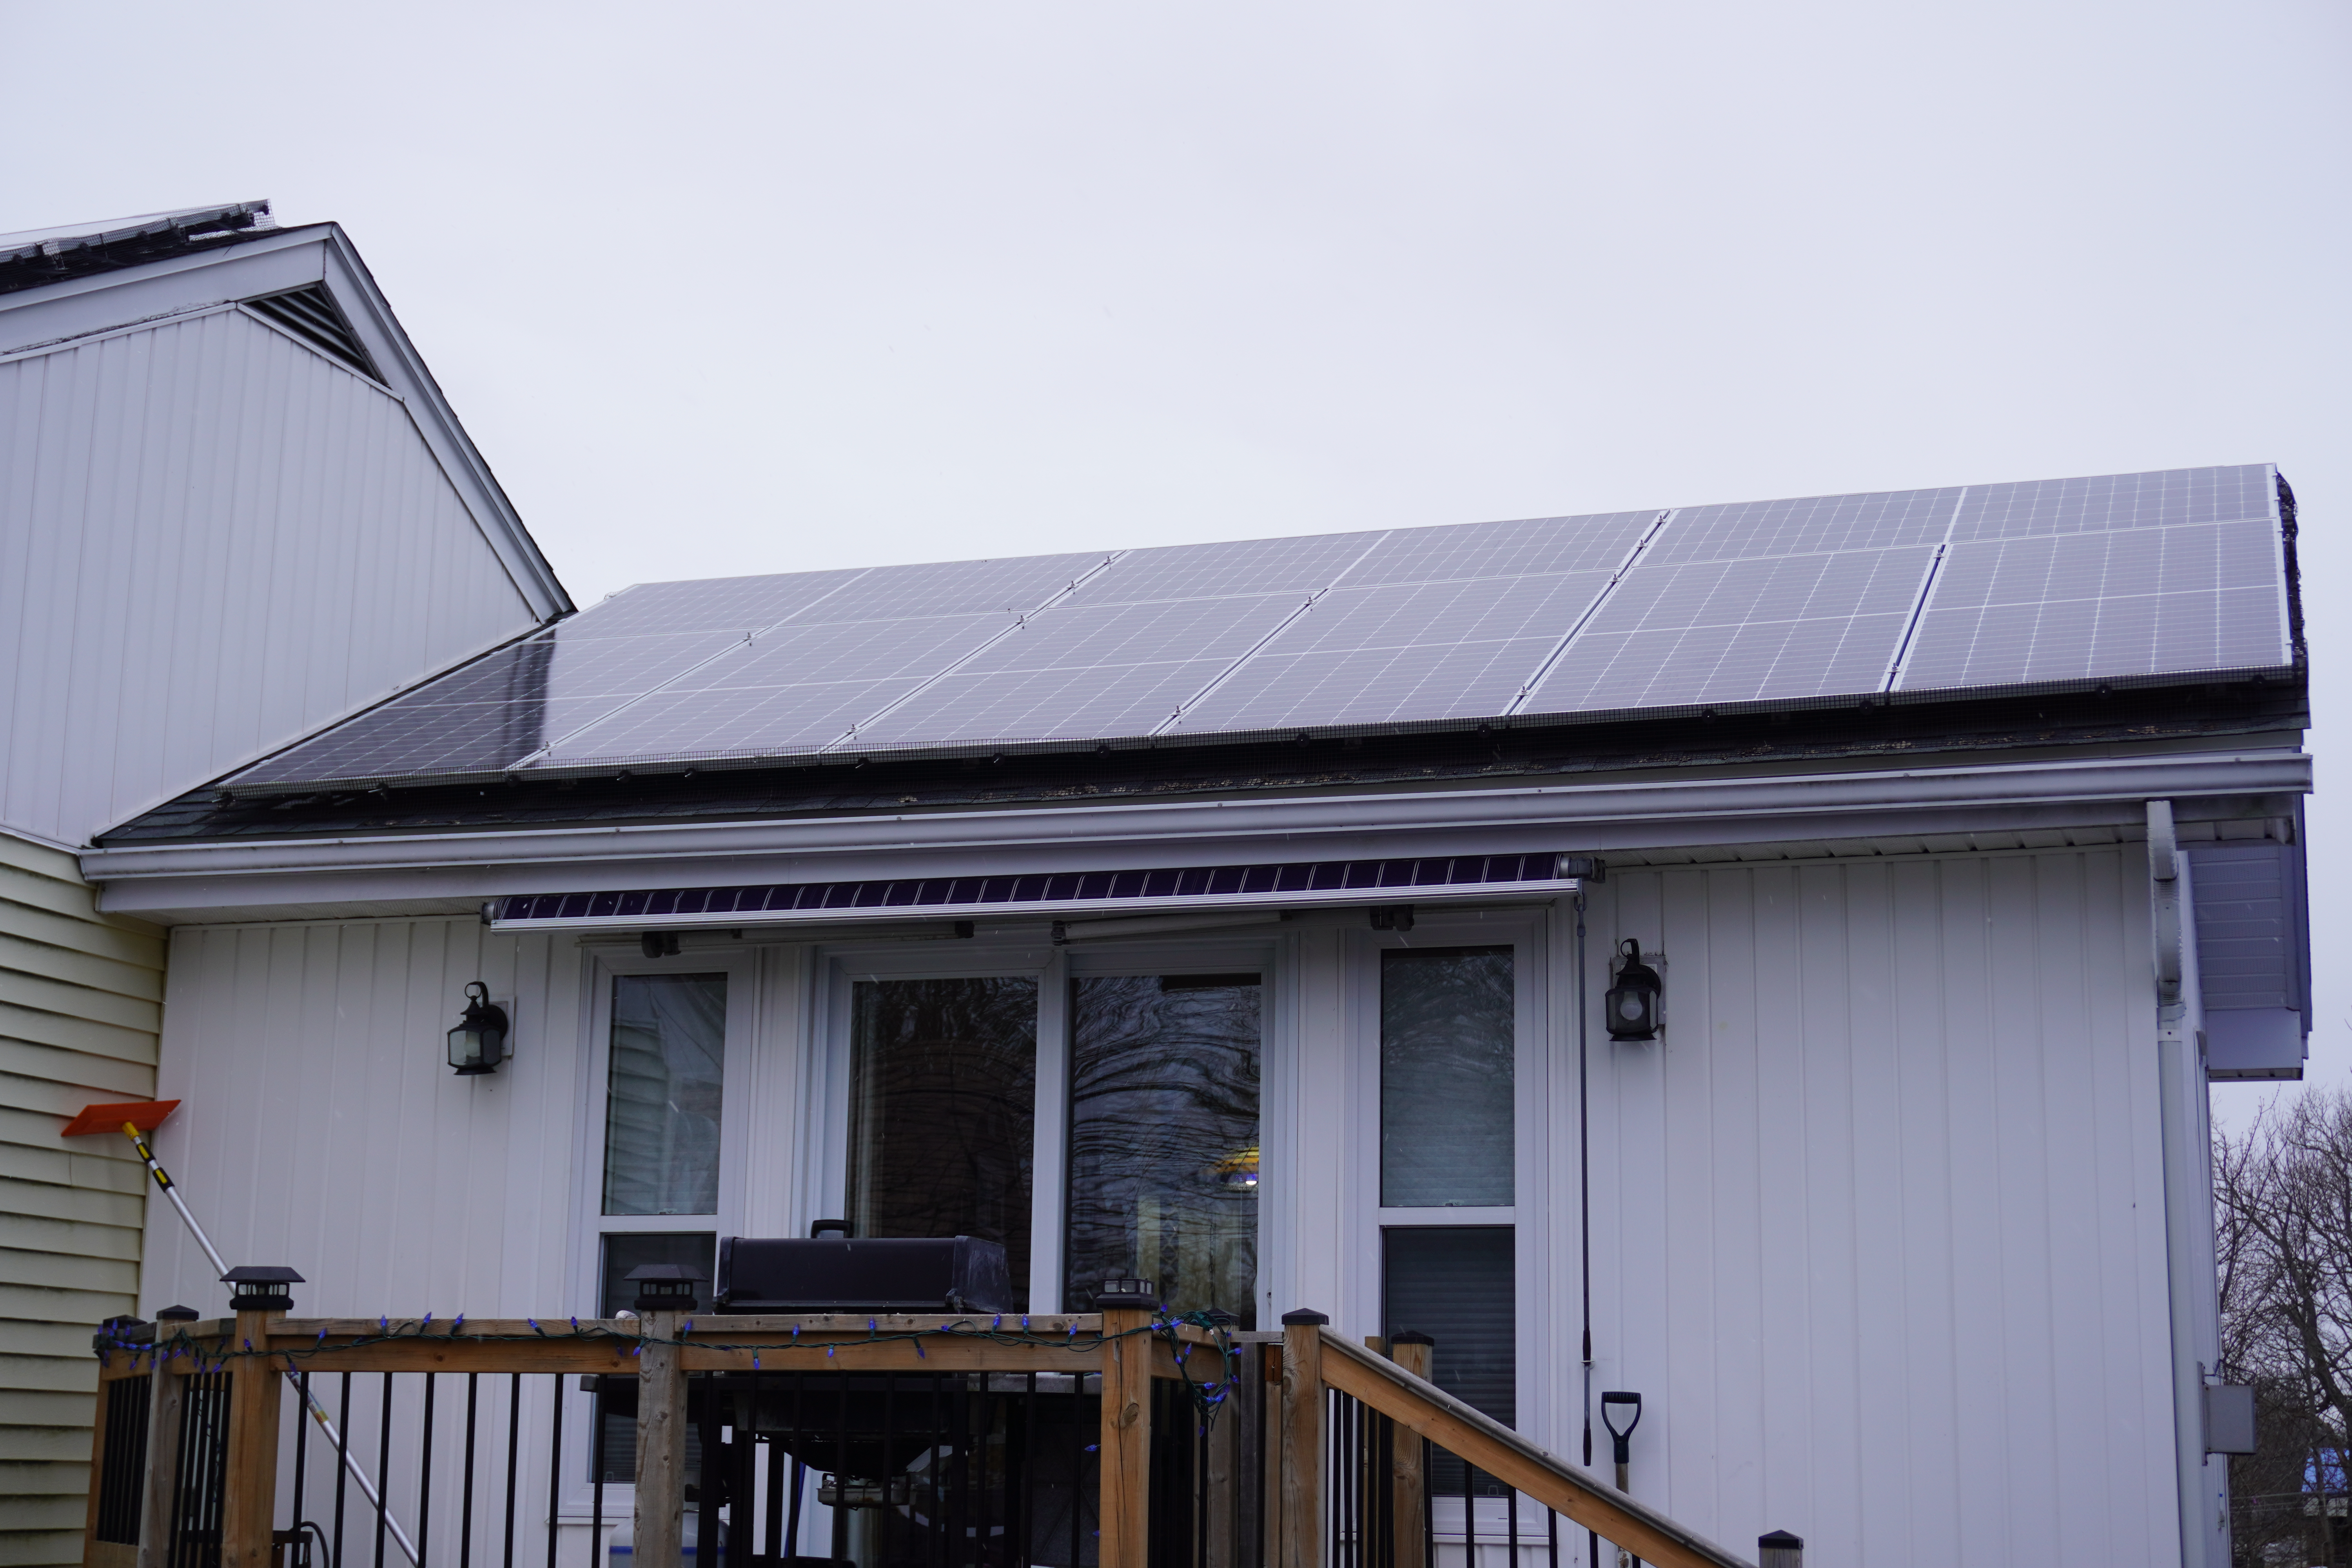 Nova Scotia’s solar industry continues to soar at a record pace